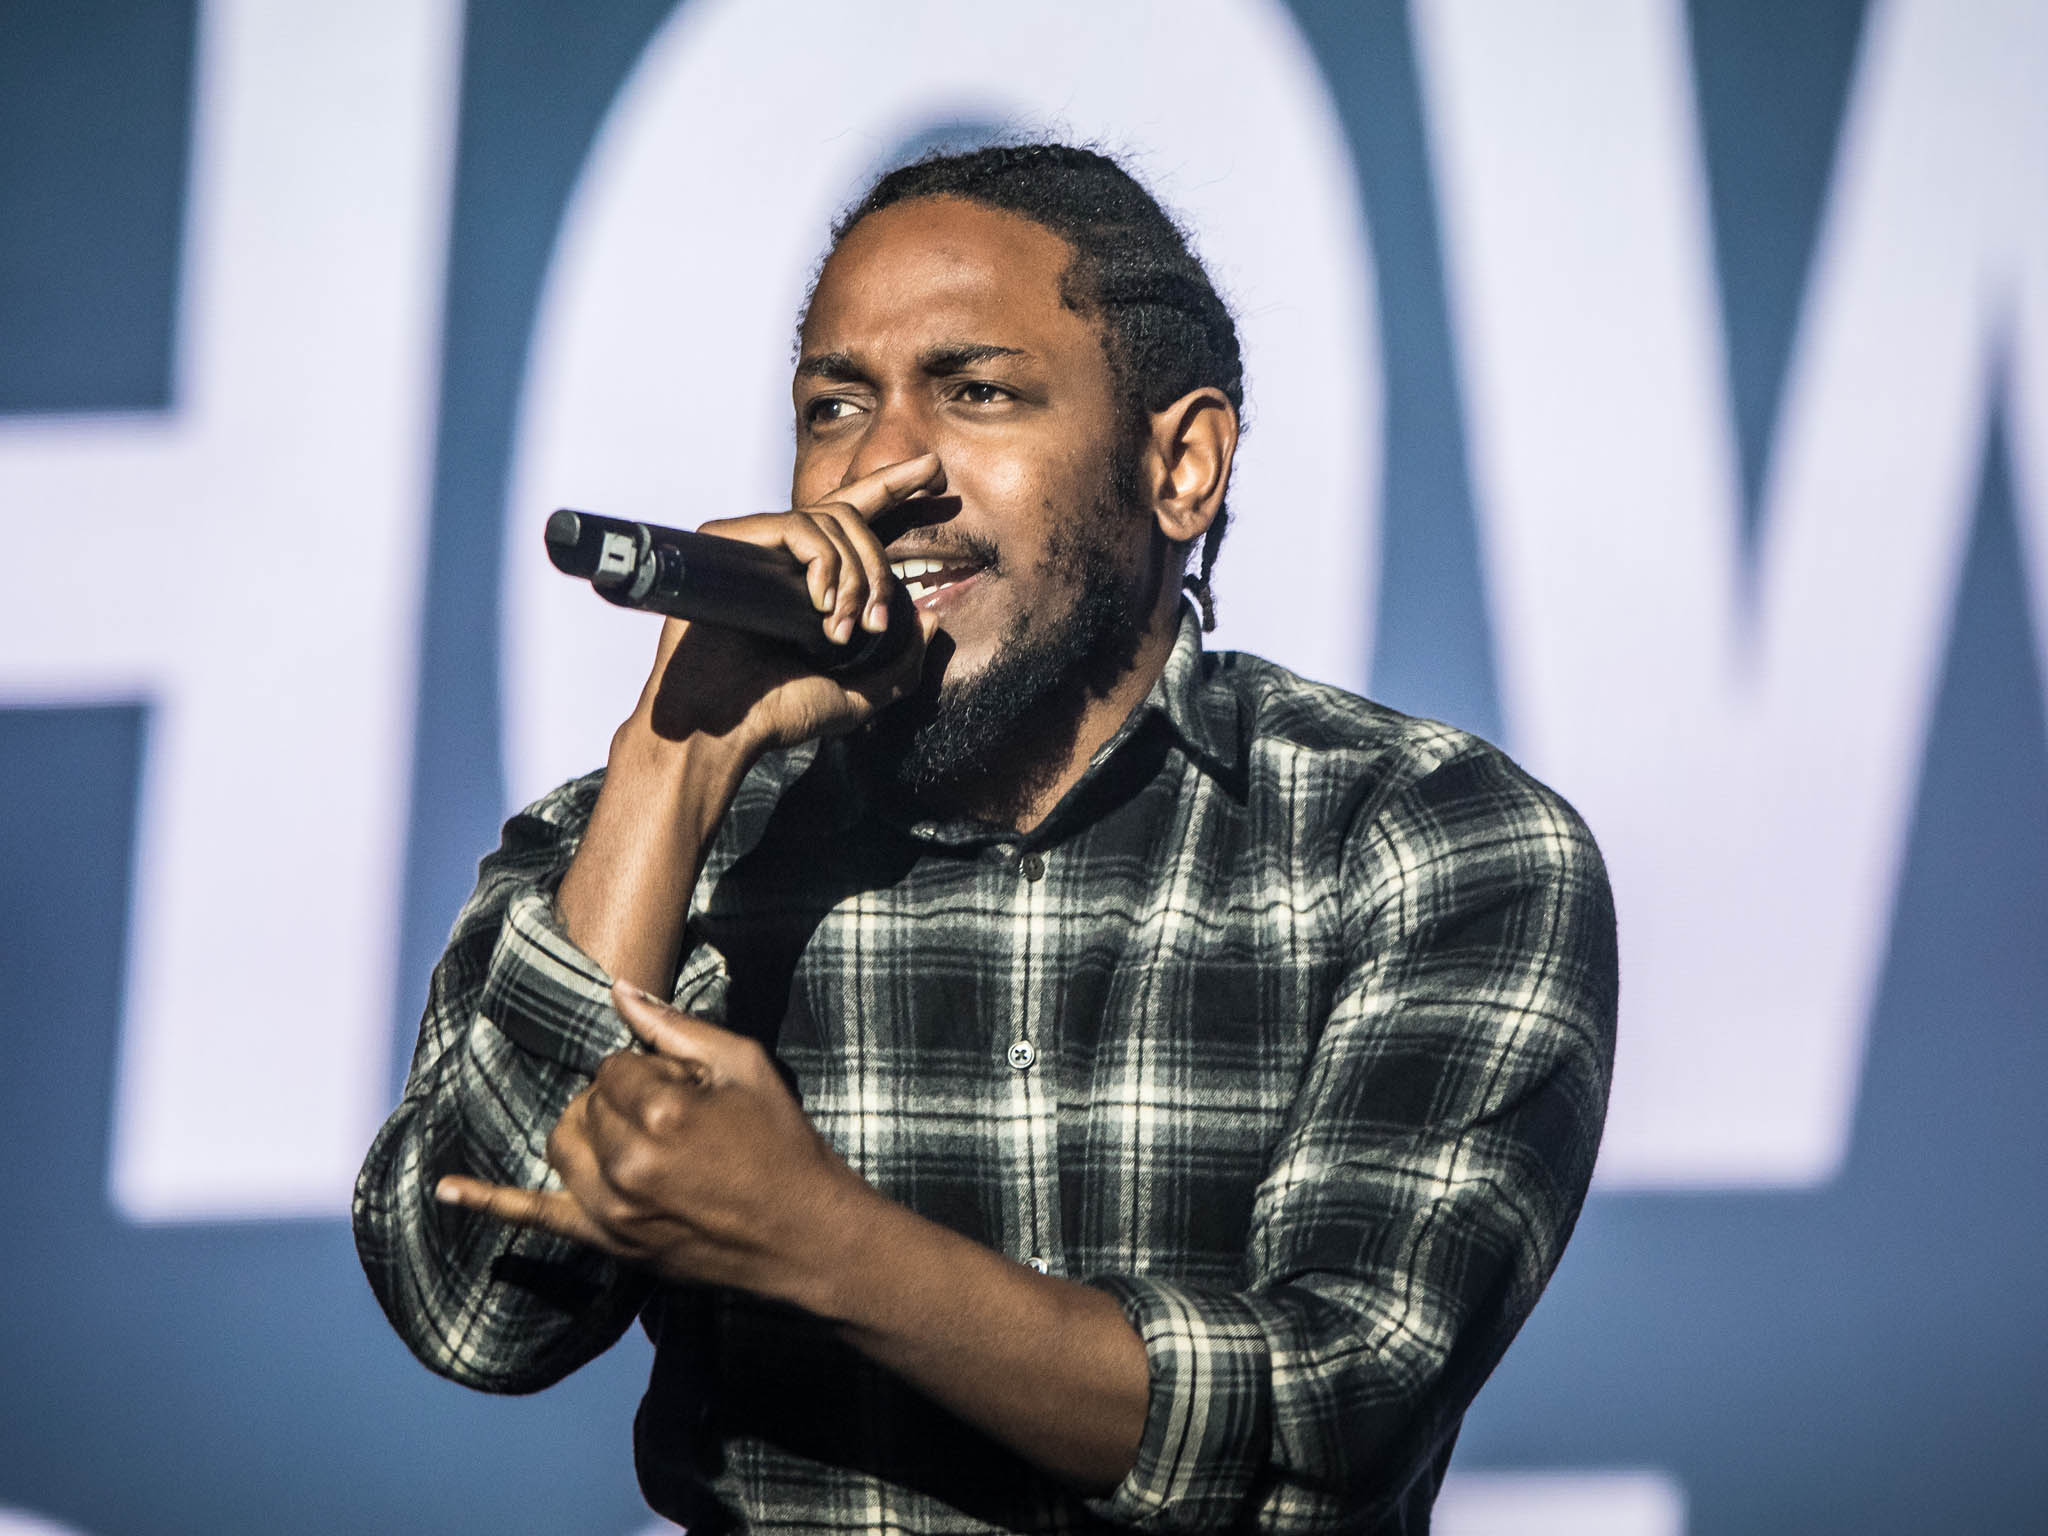 What makes Kendrick Lamar stand out from other rappers